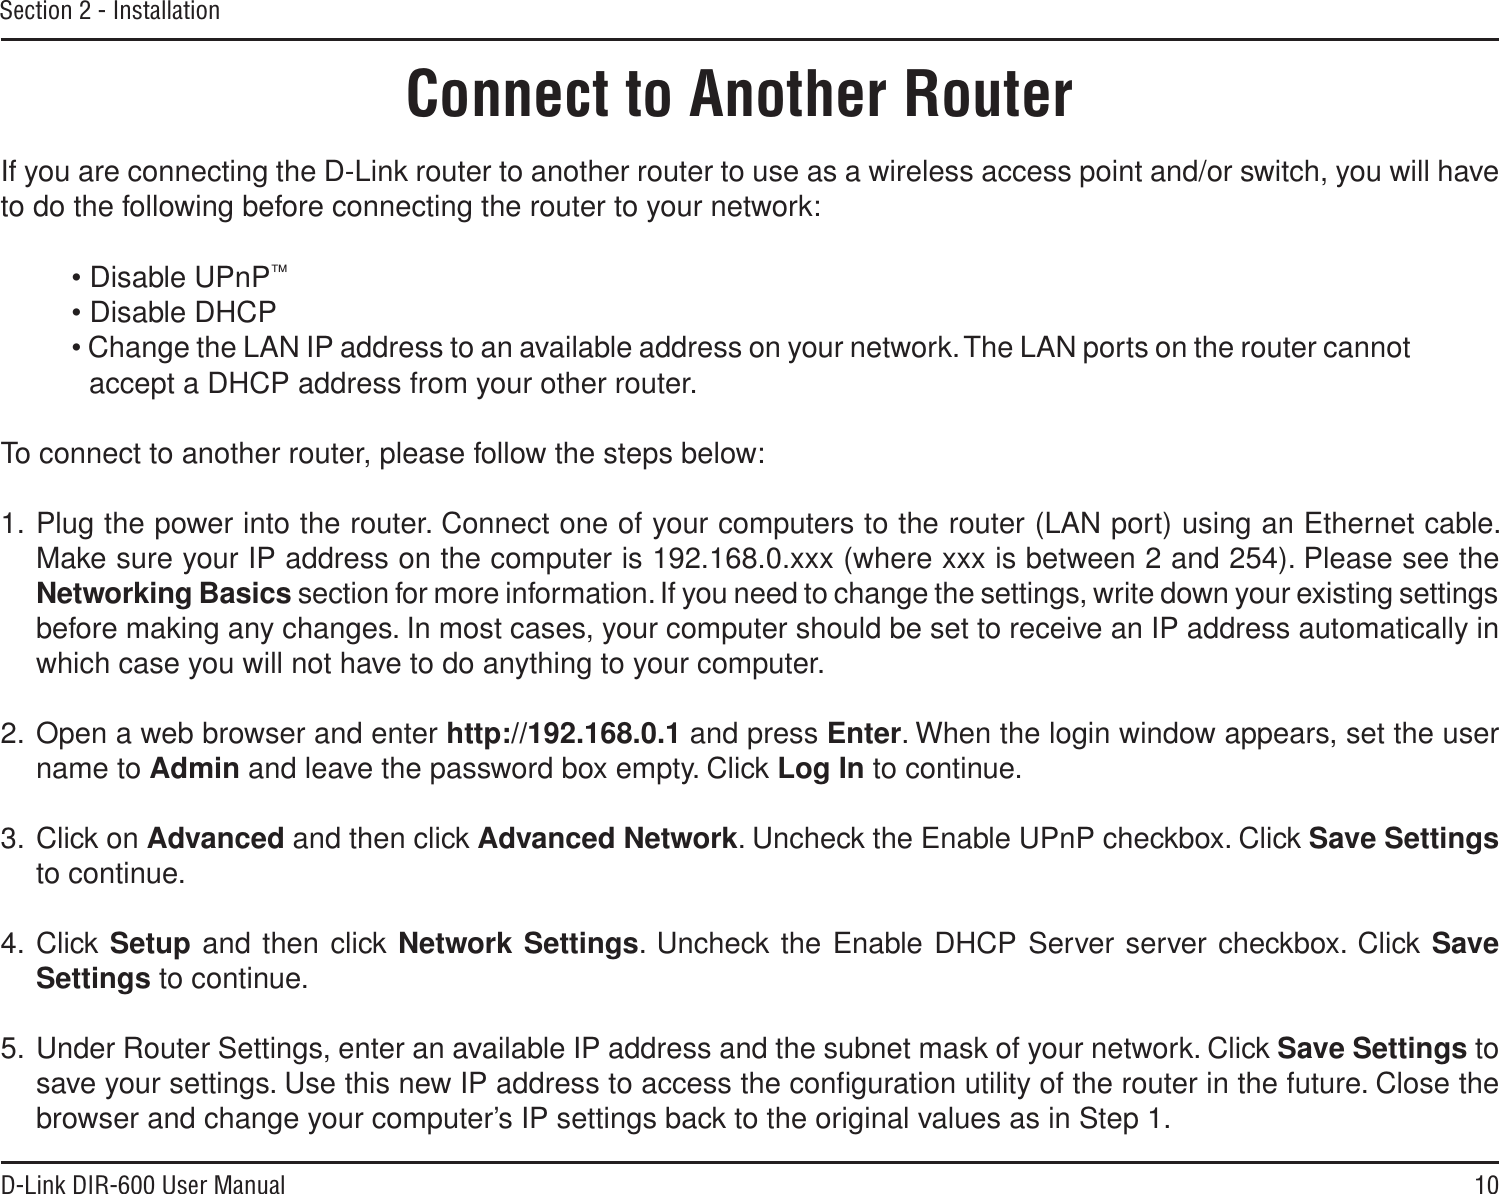 10D-Link DIR-600 User ManualSection 2 - InstallationIf you are connecting the D-Link router to another router to use as a wireless access point and/or switch, you will have to do the following before connecting the router to your network:• Disable UPnP™• Disable DHCP• Change the LAN IP address to an available address on your network. The LAN ports on the router cannot accept a DHCP address from your other router.To connect to another router, please follow the steps below:1. Plug the power into the router. Connect one of your computers to the router (LAN port) using an Ethernet cable. Make sure your IP address on the computer is 192.168.0.xxx (where xxx is between 2 and 254). Please see the Networking Basics section for more information. If you need to change the settings, write down your existing settings before making any changes. In most cases, your computer should be set to receive an IP address automatically in which case you will not have to do anything to your computer.2. Open a web browser and enter http://192.168.0.1 and press Enter. When the login window appears, set the user name to Admin and leave the password box empty. Click Log In to continue.3. Click on Advanced and then click Advanced Network. Uncheck the Enable UPnP checkbox. Click Save Settingsto continue. 4. Click Setup and then click Network Settings. Uncheck the Enable DHCP Server server checkbox. Click SaveSettings to continue.5. Under Router Settings, enter an available IP address and the subnet mask of your network. Click Save Settings to save your settings. Use this new IP address to access the conﬁguration utility of the router in the future. Close the browser and change your computer’s IP settings back to the original values as in Step 1.Connect to Another Router